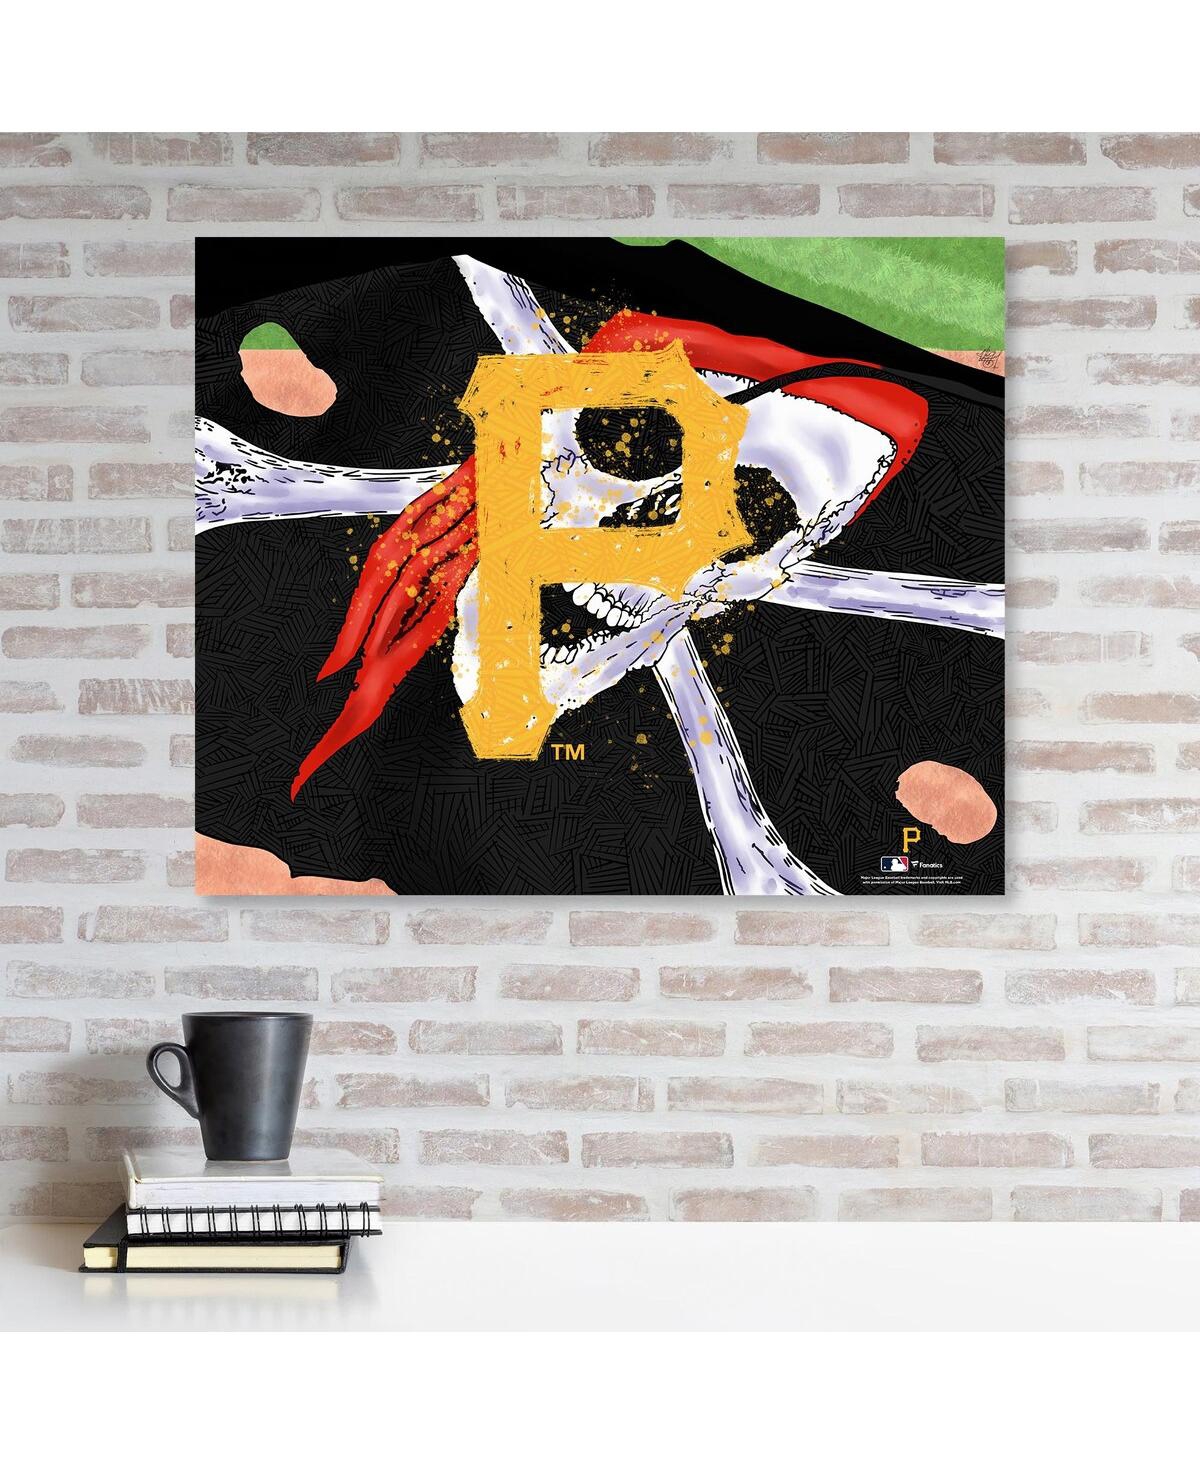 Pittsburgh Pirates Stretched 20" x 24" Canvas Giclee Print - Designed by Artist Maz Adams - Multi